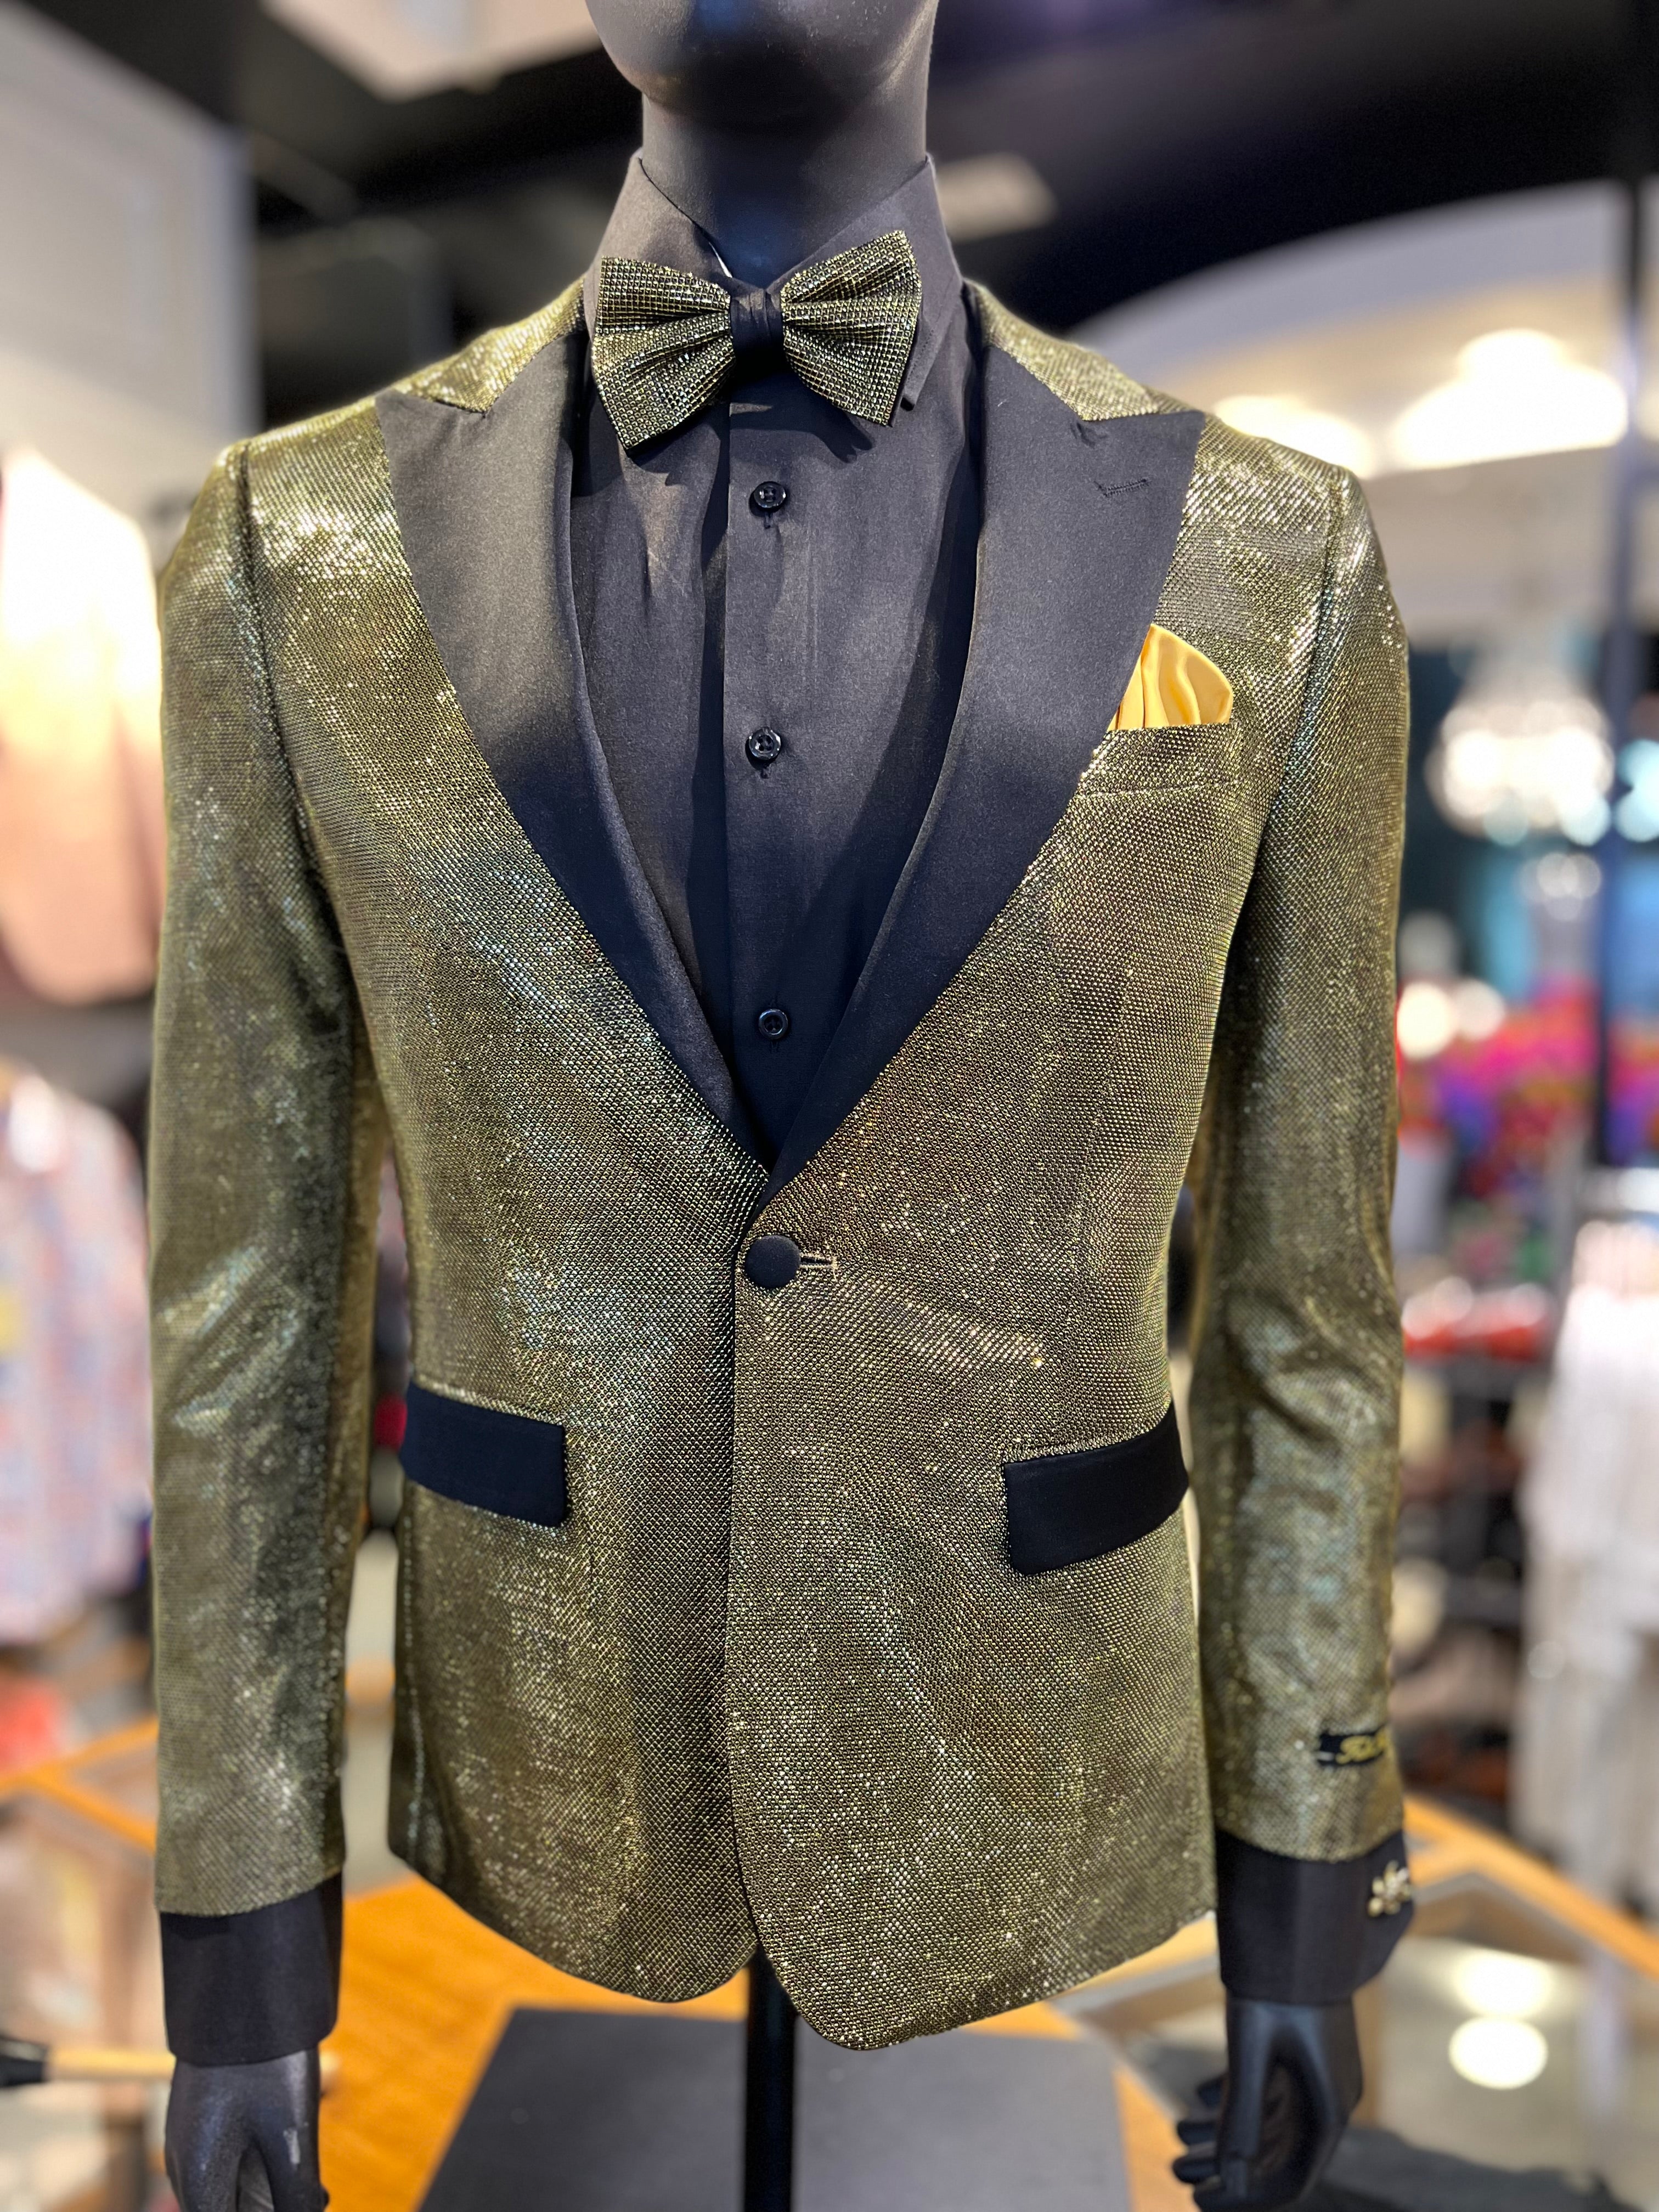 Dazzling Gold Suit by Vercini